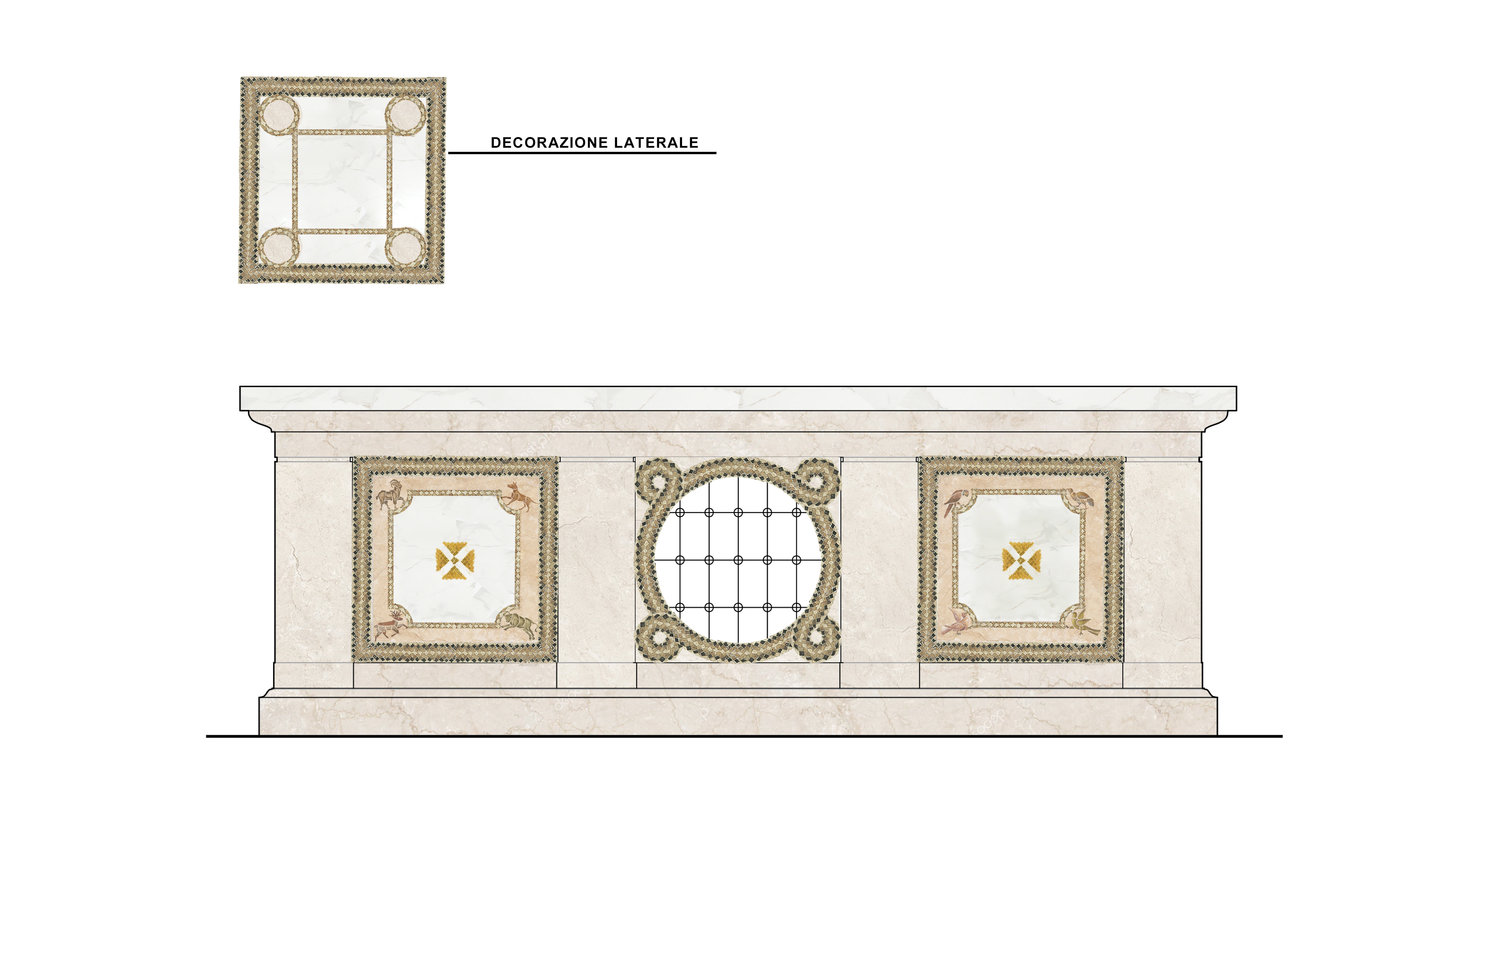 This is the latest drawing of the new altar being created for the Cathedral of St. Joseph in Jefferson City as part of a substantial renovation and renewal.